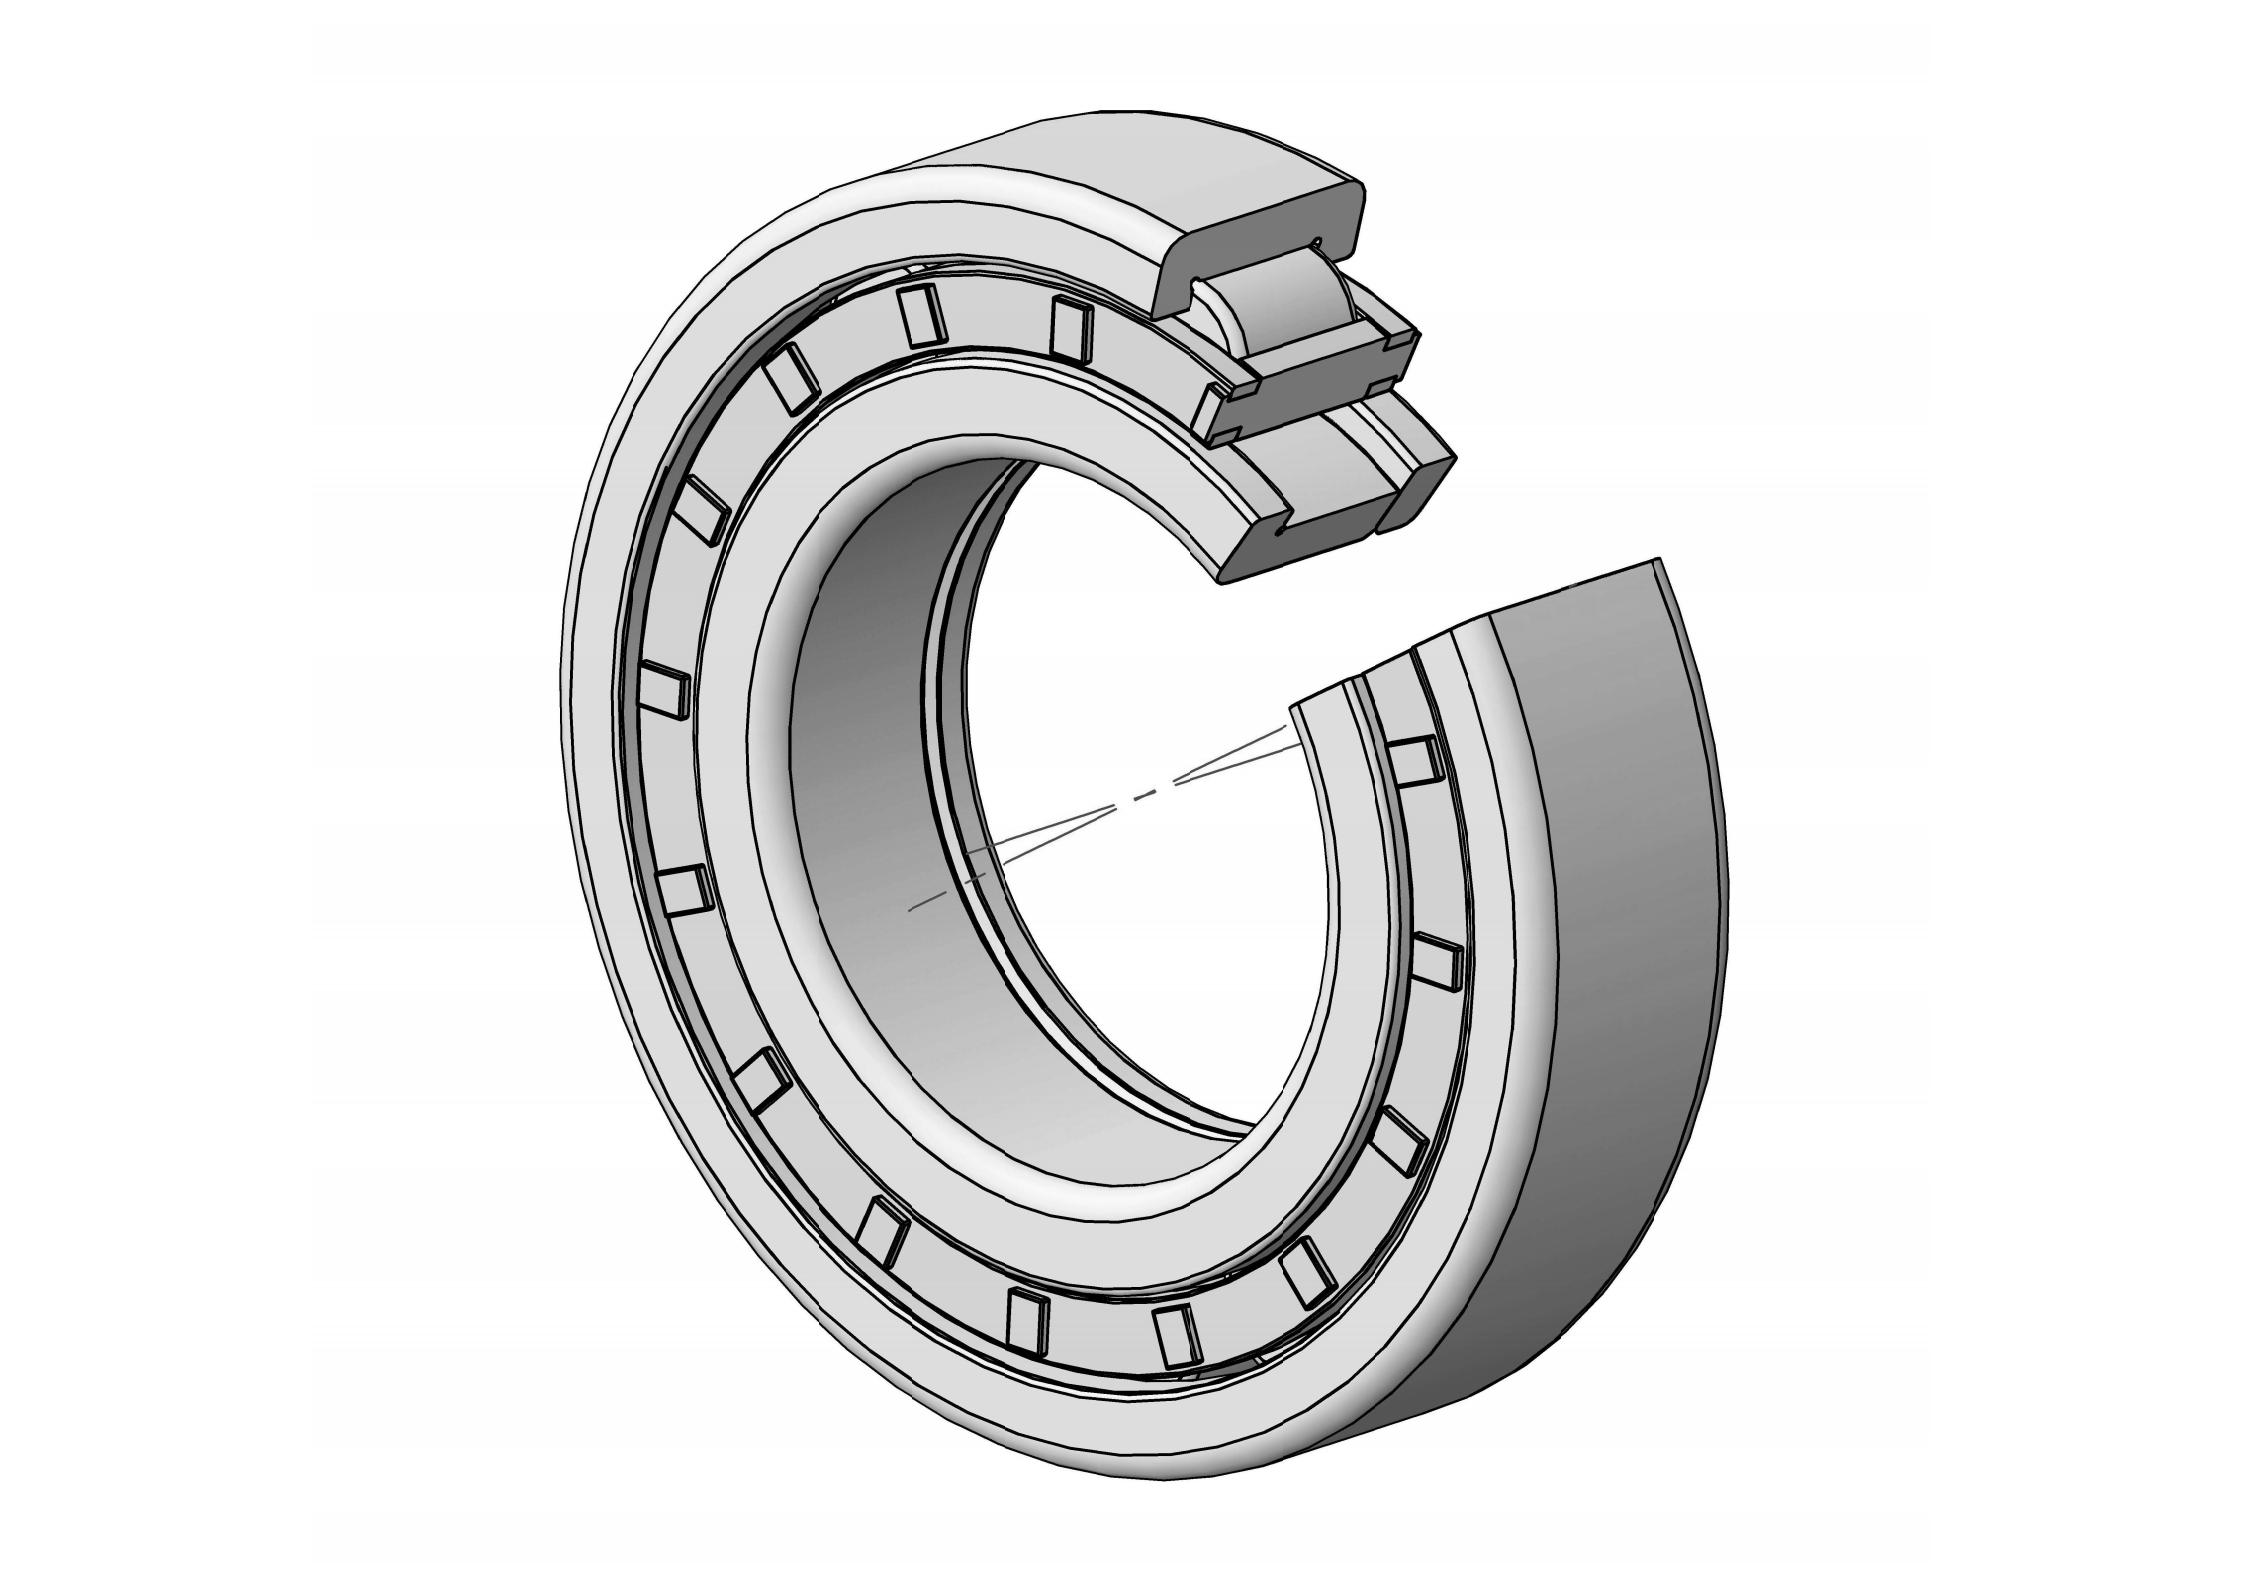 NUP2226-EM Single Row Cylindrical roller bearing 